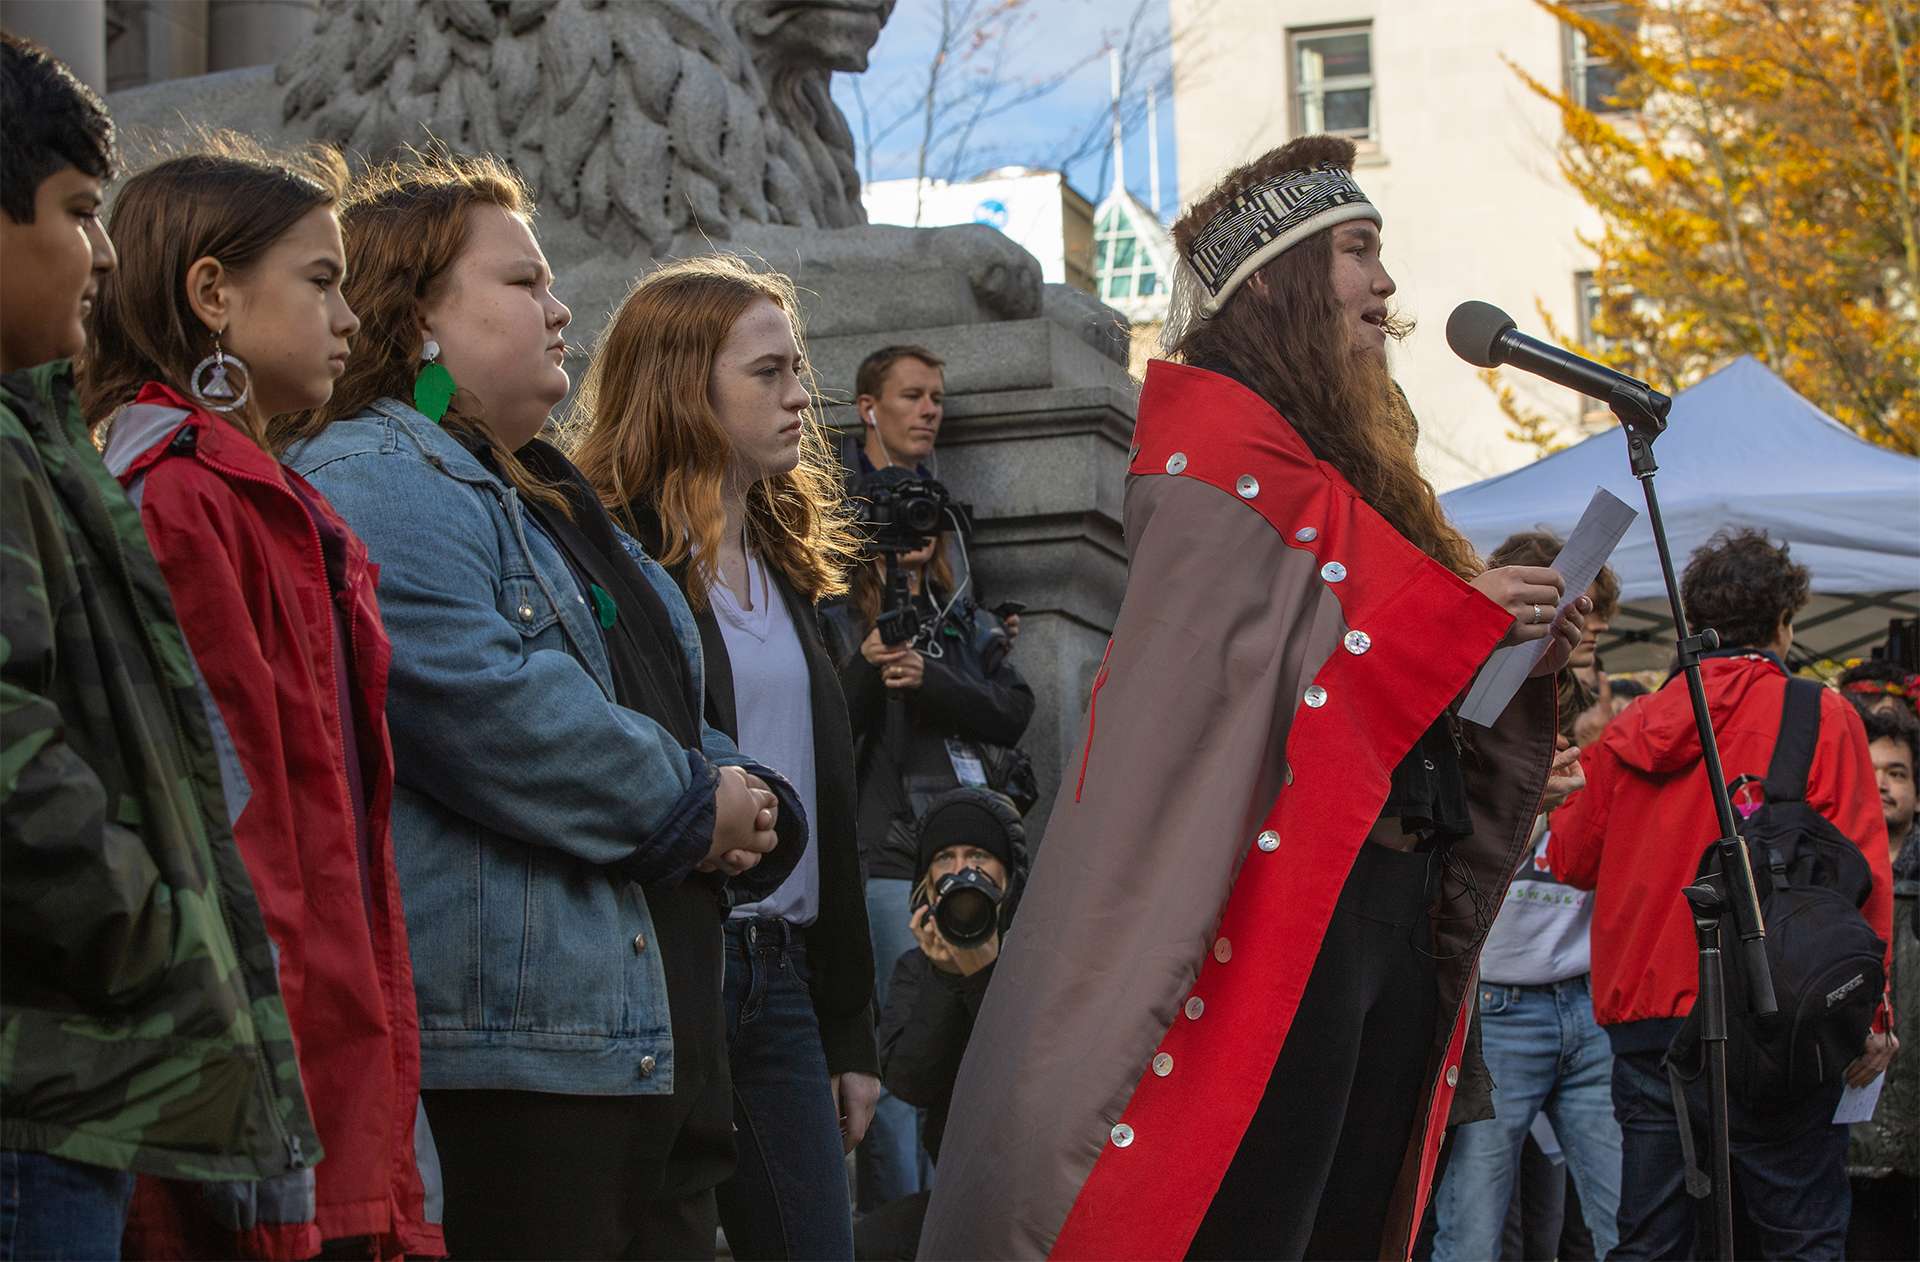 Vancouver, BC / Canada – October 25, 2019: Speakers from Canadian First Nations tribal leadership join in solidarity with Greta Thunberg to protest Canada’s inaction on global climate change.